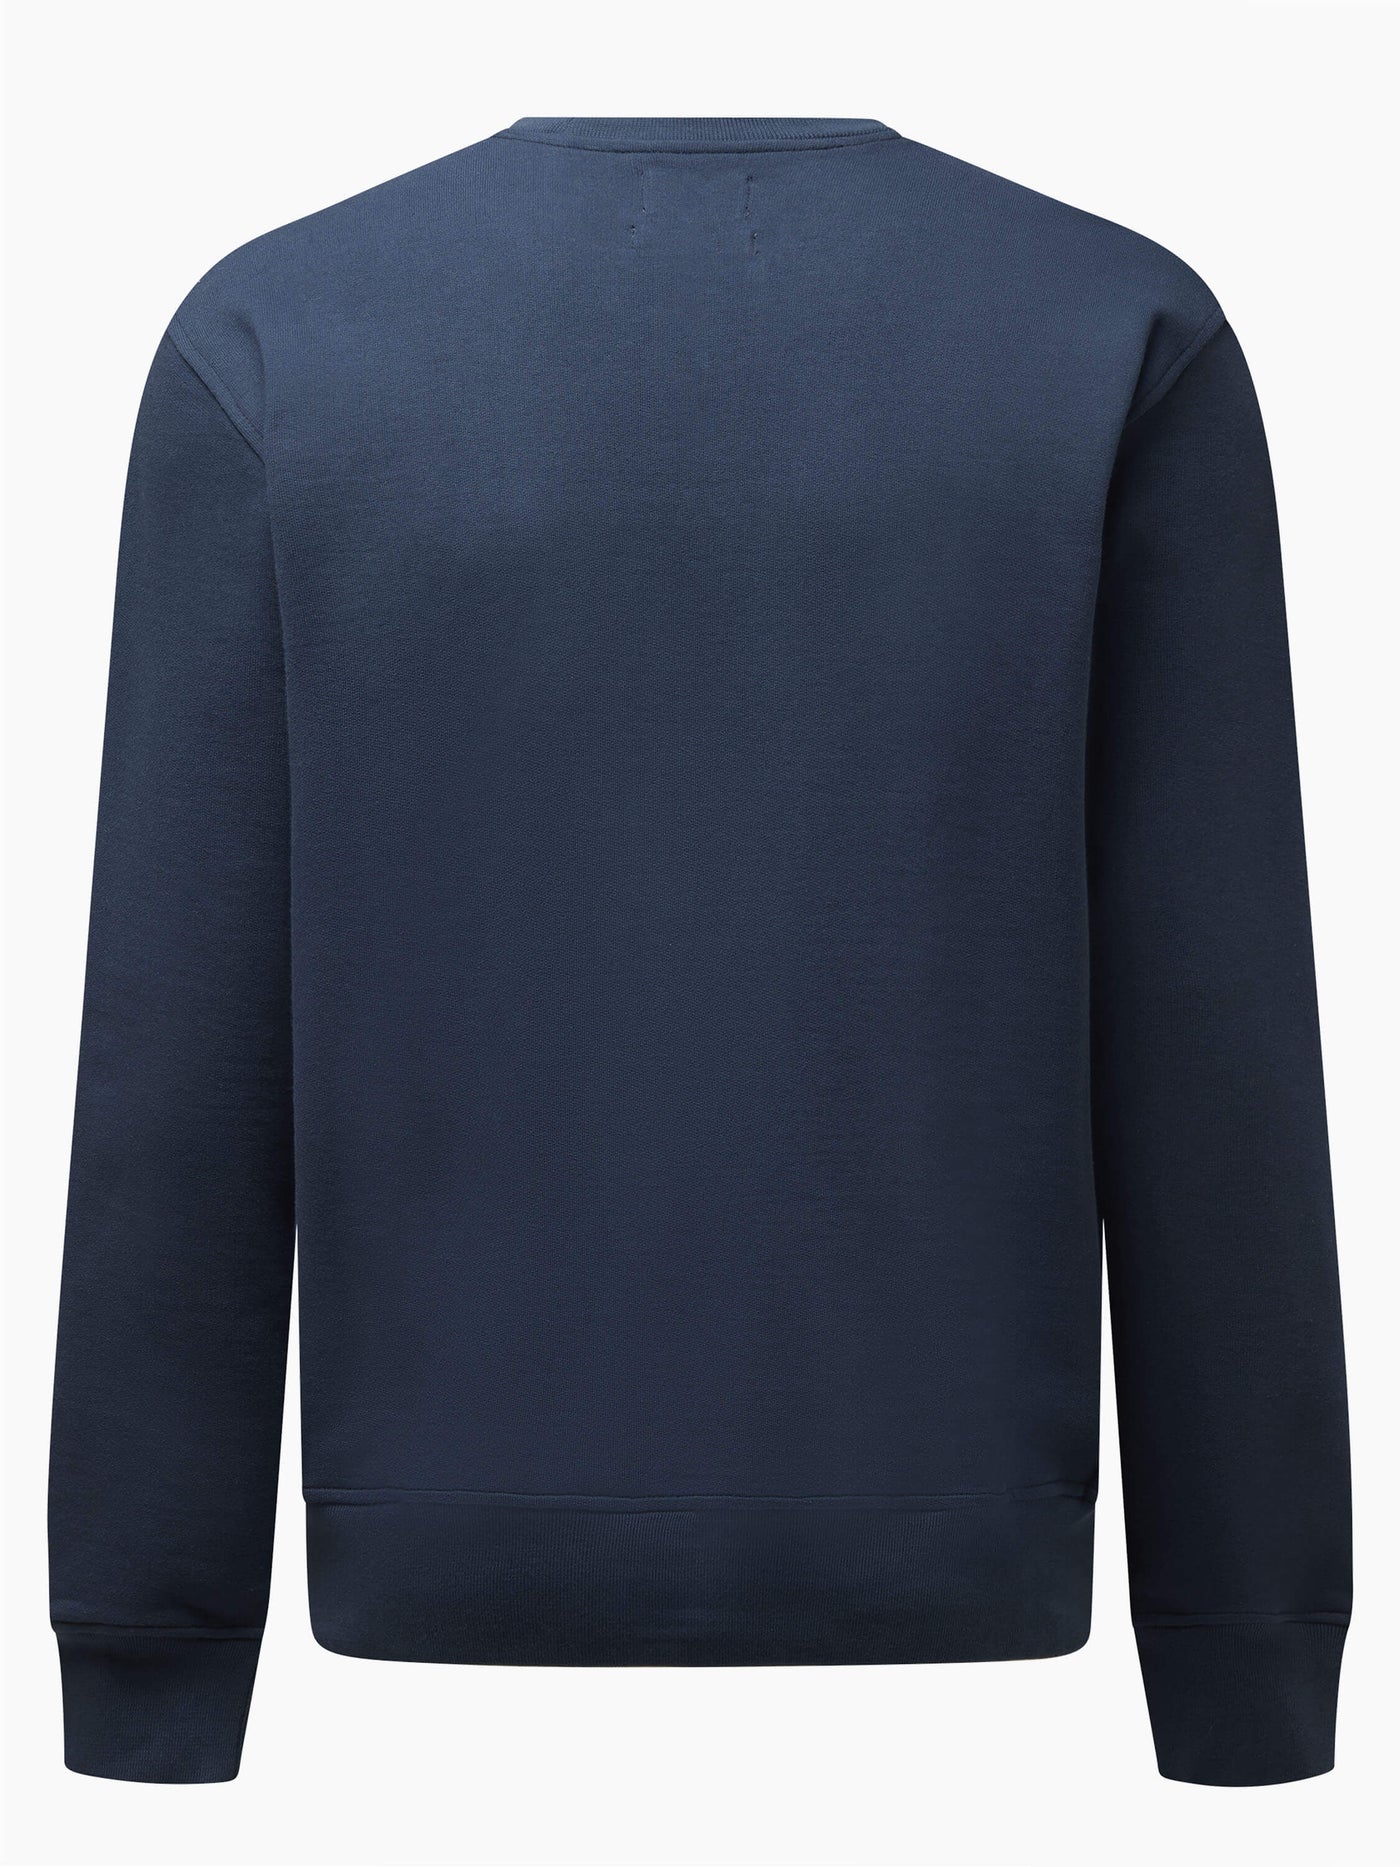 CHPT3 Elysée mens cotton sweatshirt in Outer Space navy blue, viewed from the back #color_outer-space-blue